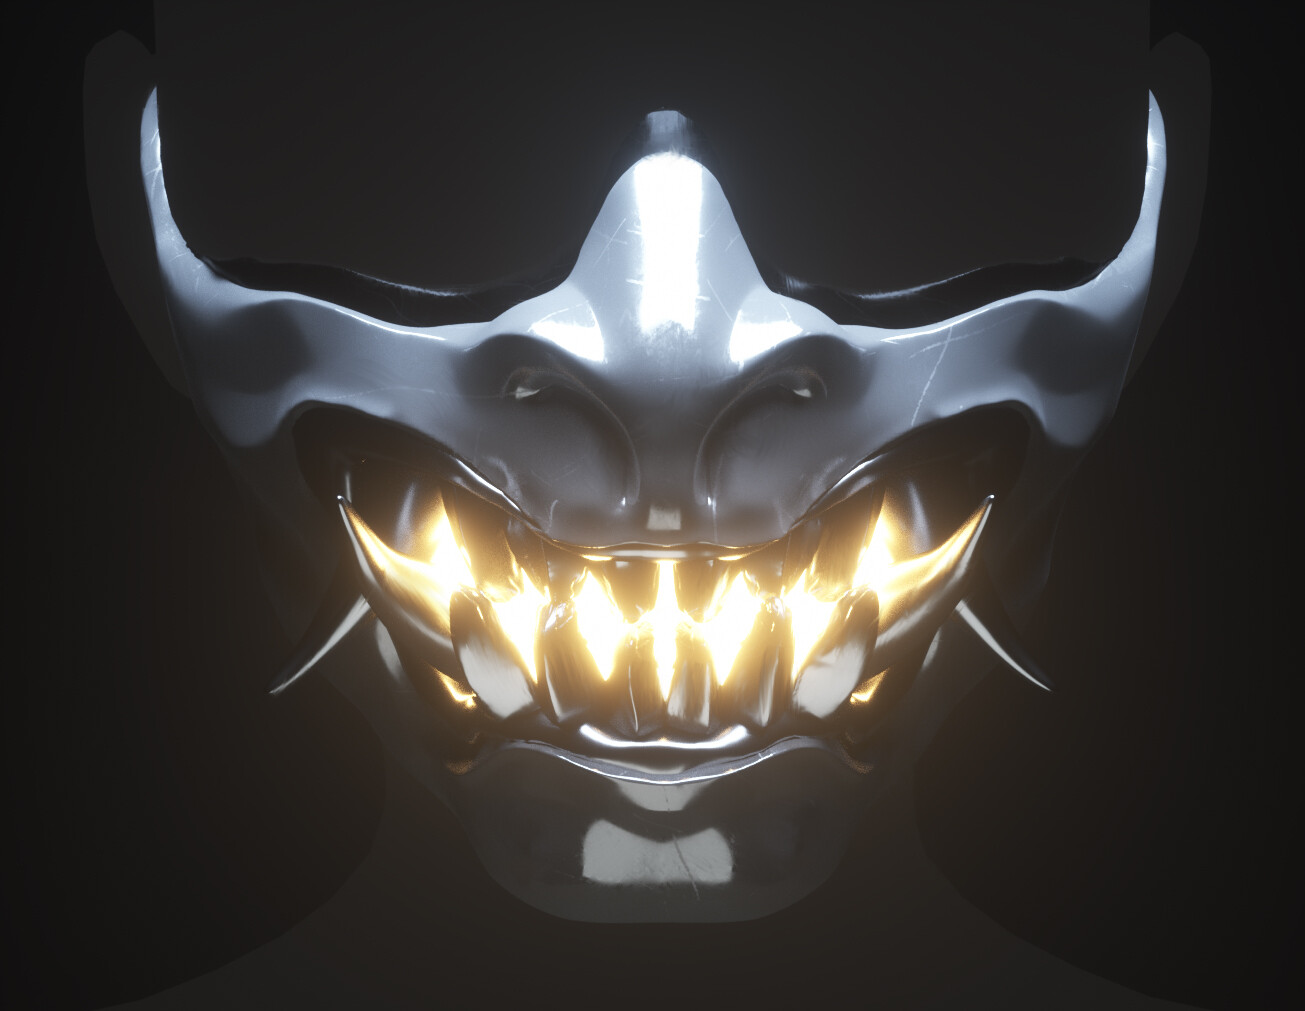 Oni Mask with glowing emission. I thought it was a nice added touch. 